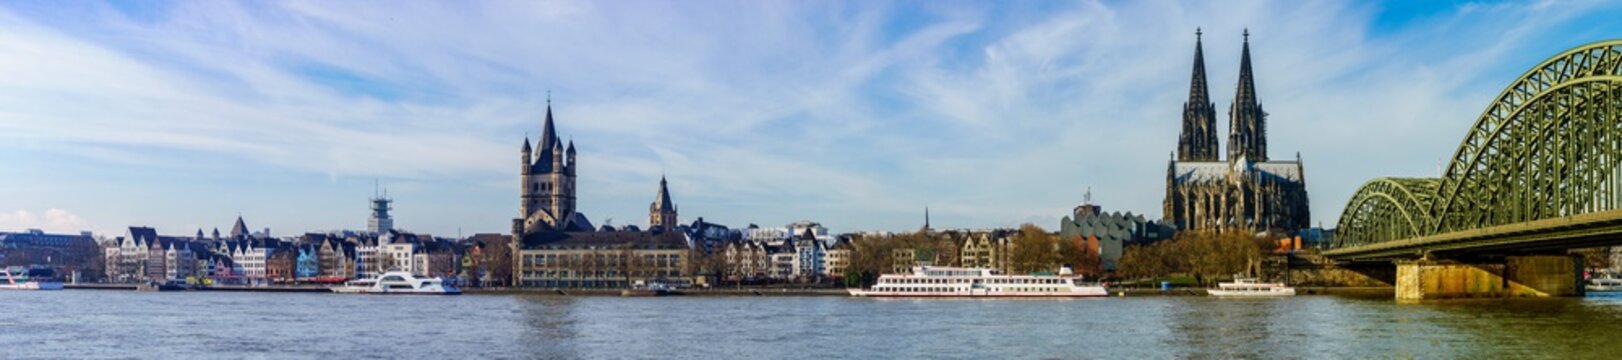 Panorama of Cologne with Great St. Martin Church, Cologne Cathedral, Hohenzollern Bridge and the Rhine river, Germany